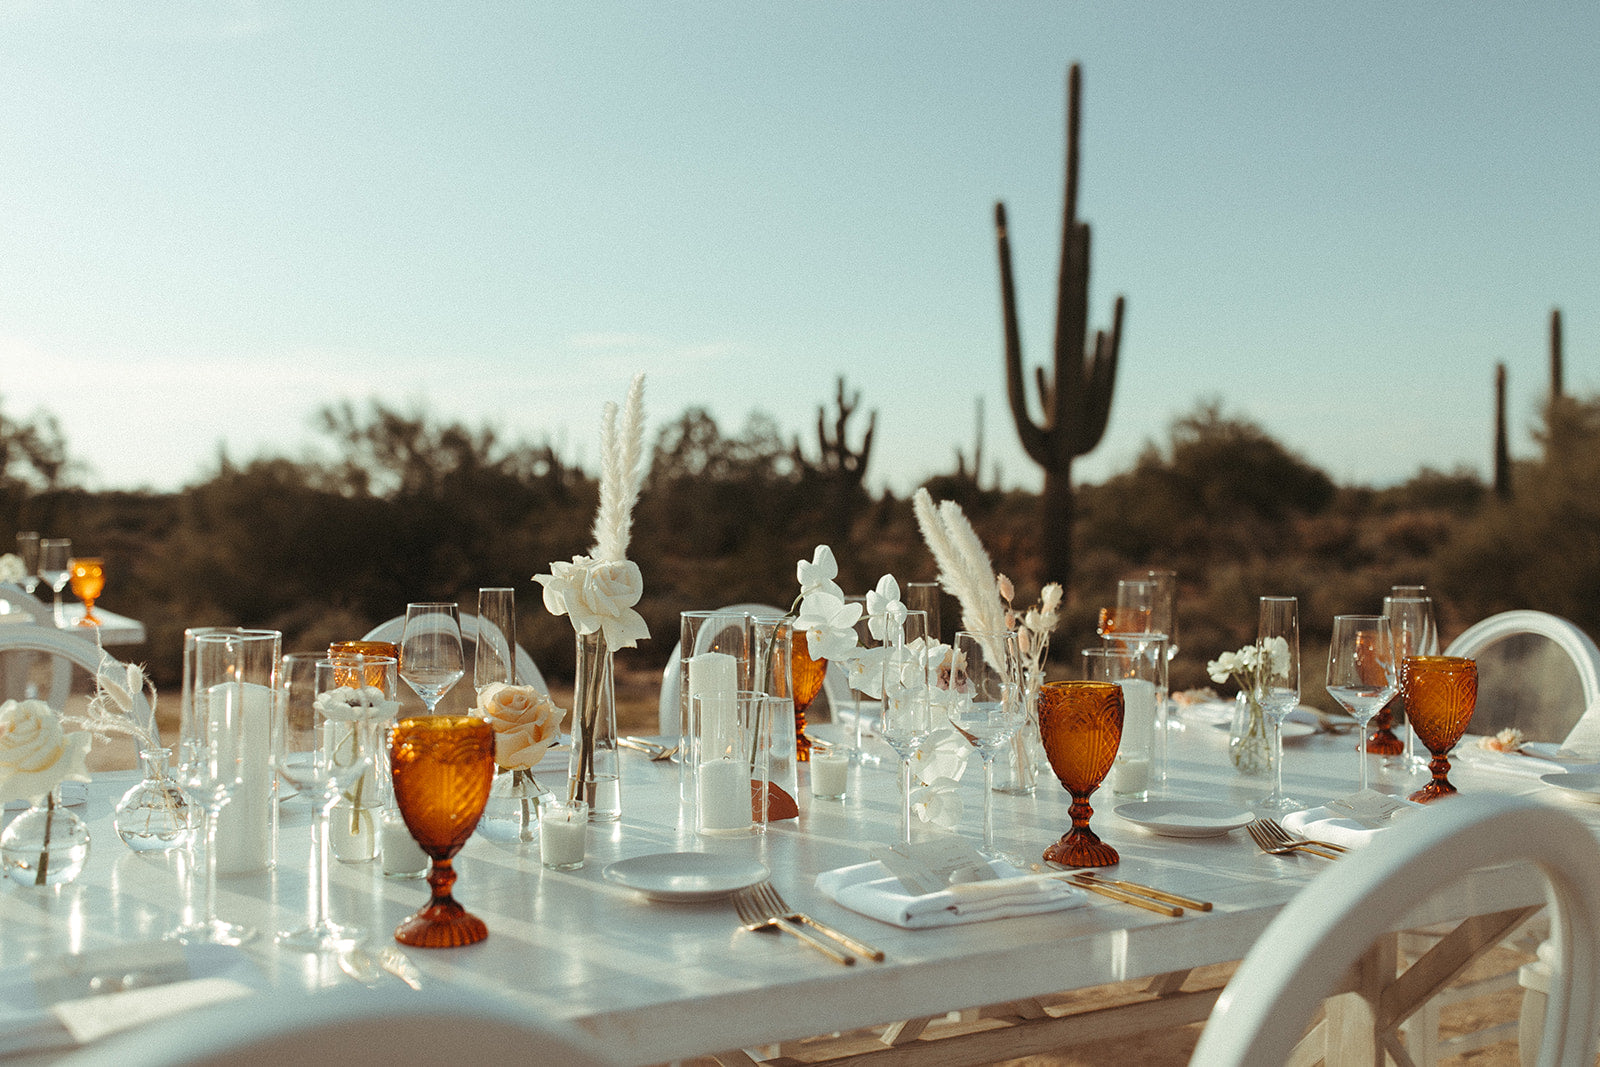 Reception wedding flowers on a table at sunset in Arizona